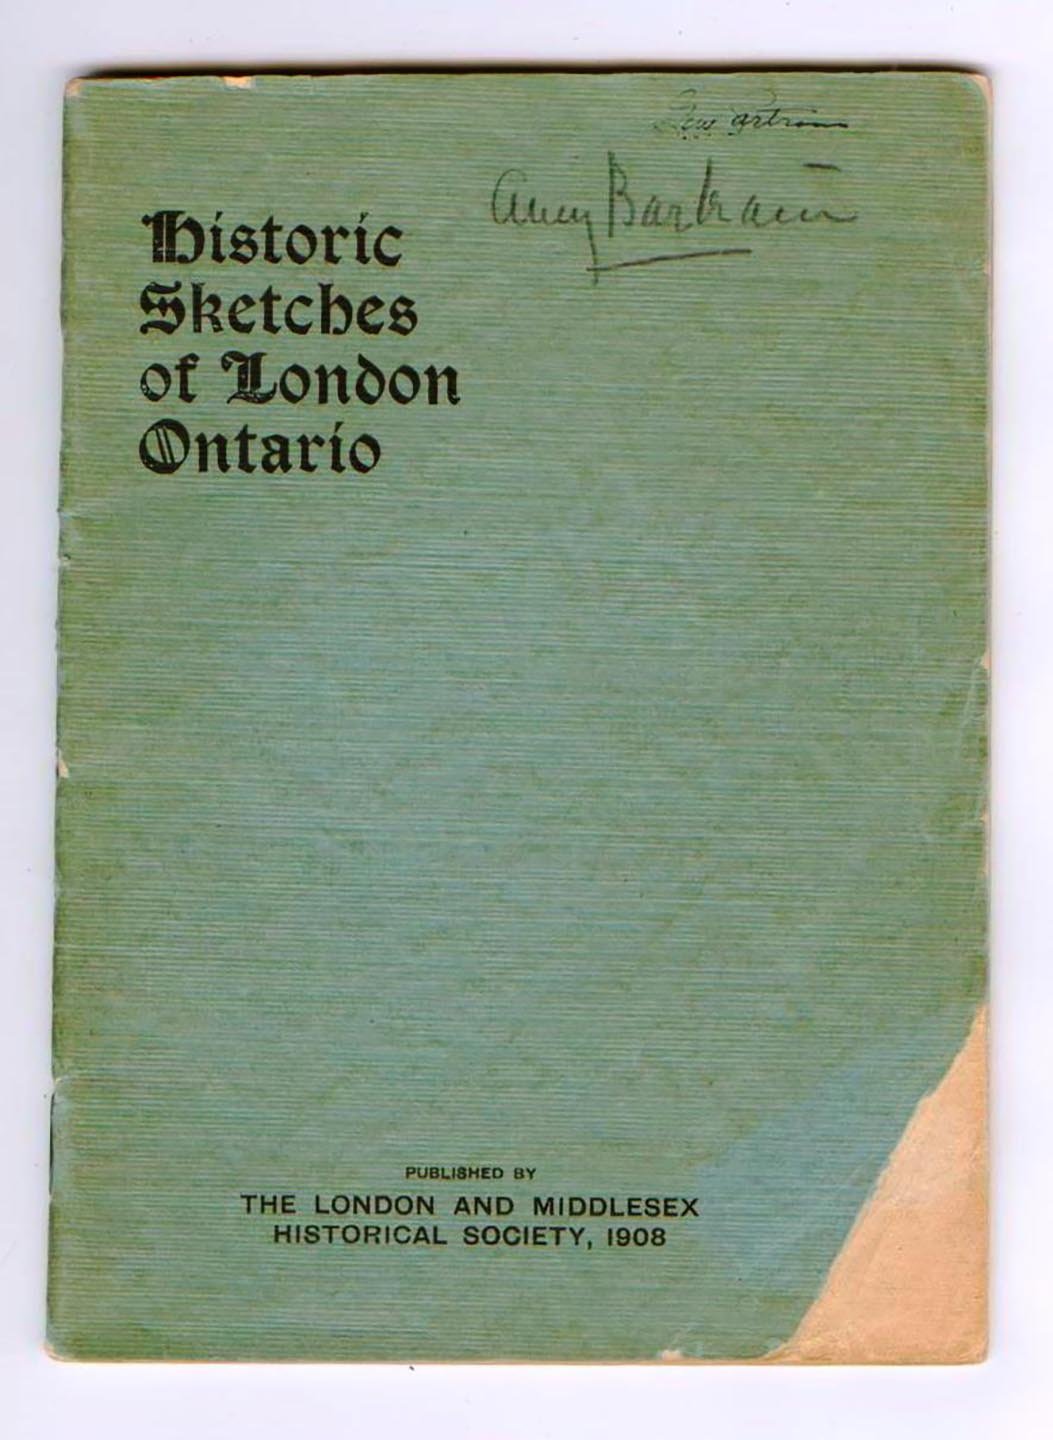 Programs of The London and Middlesex Historical Society: Transactions 1902-1907